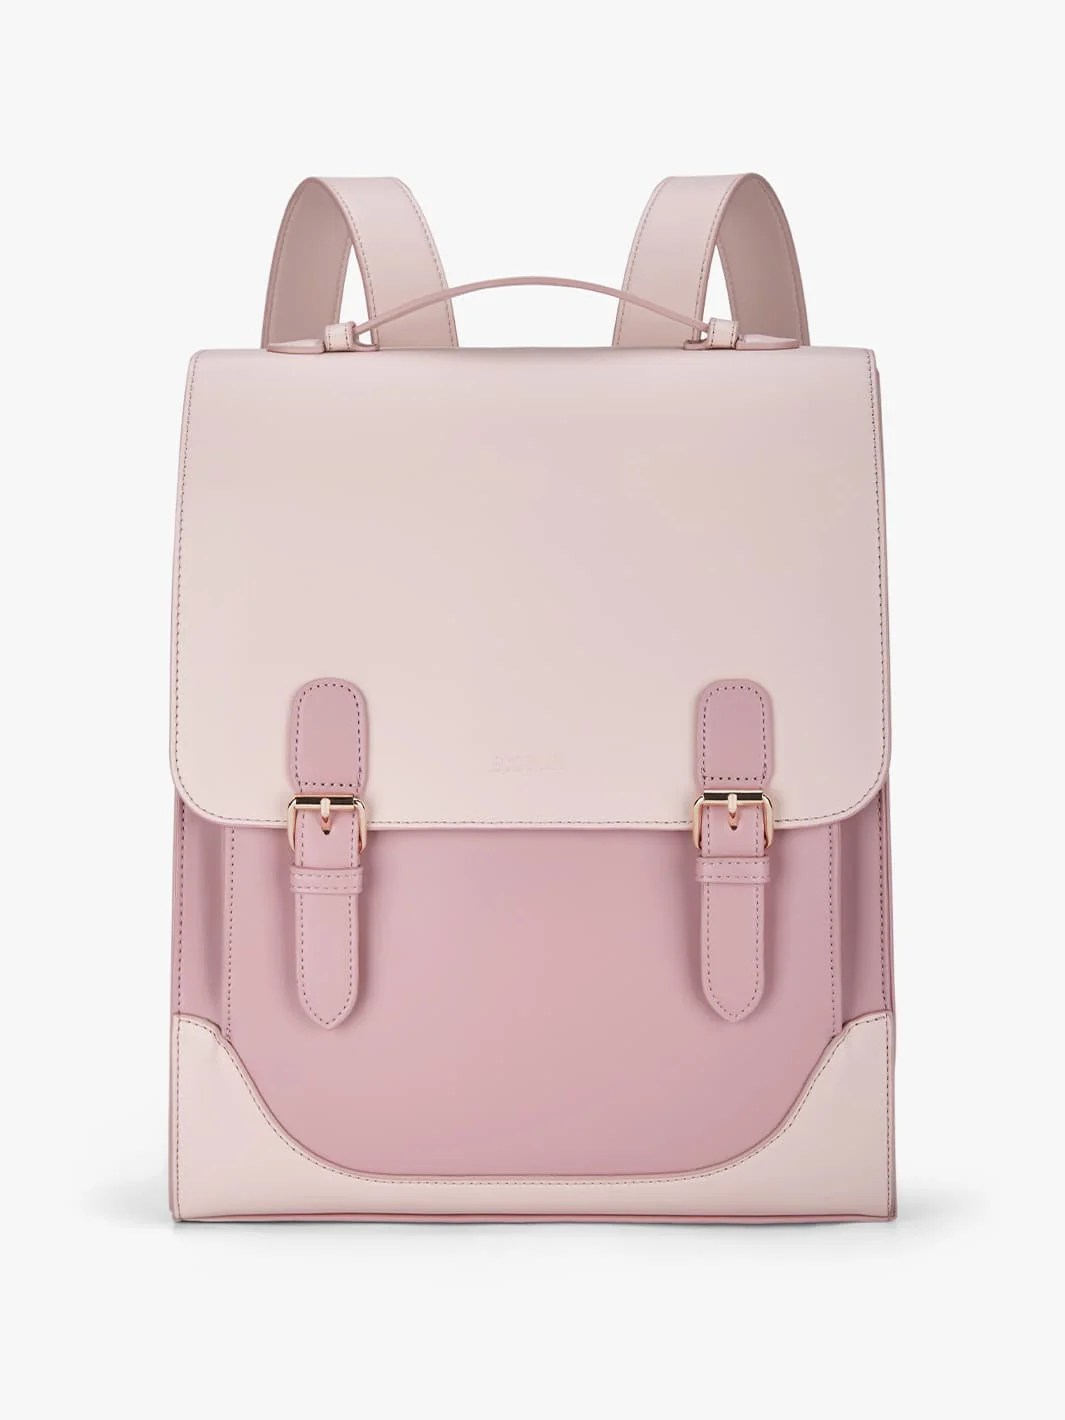 

You'll love Verbena Vintage Laptop Backpack-Pink! It's chic, stylish, made with quality materials and the perfect size. The bright color adds a touch of fun that you'll enjoy every day. An excellent choice for any journey.